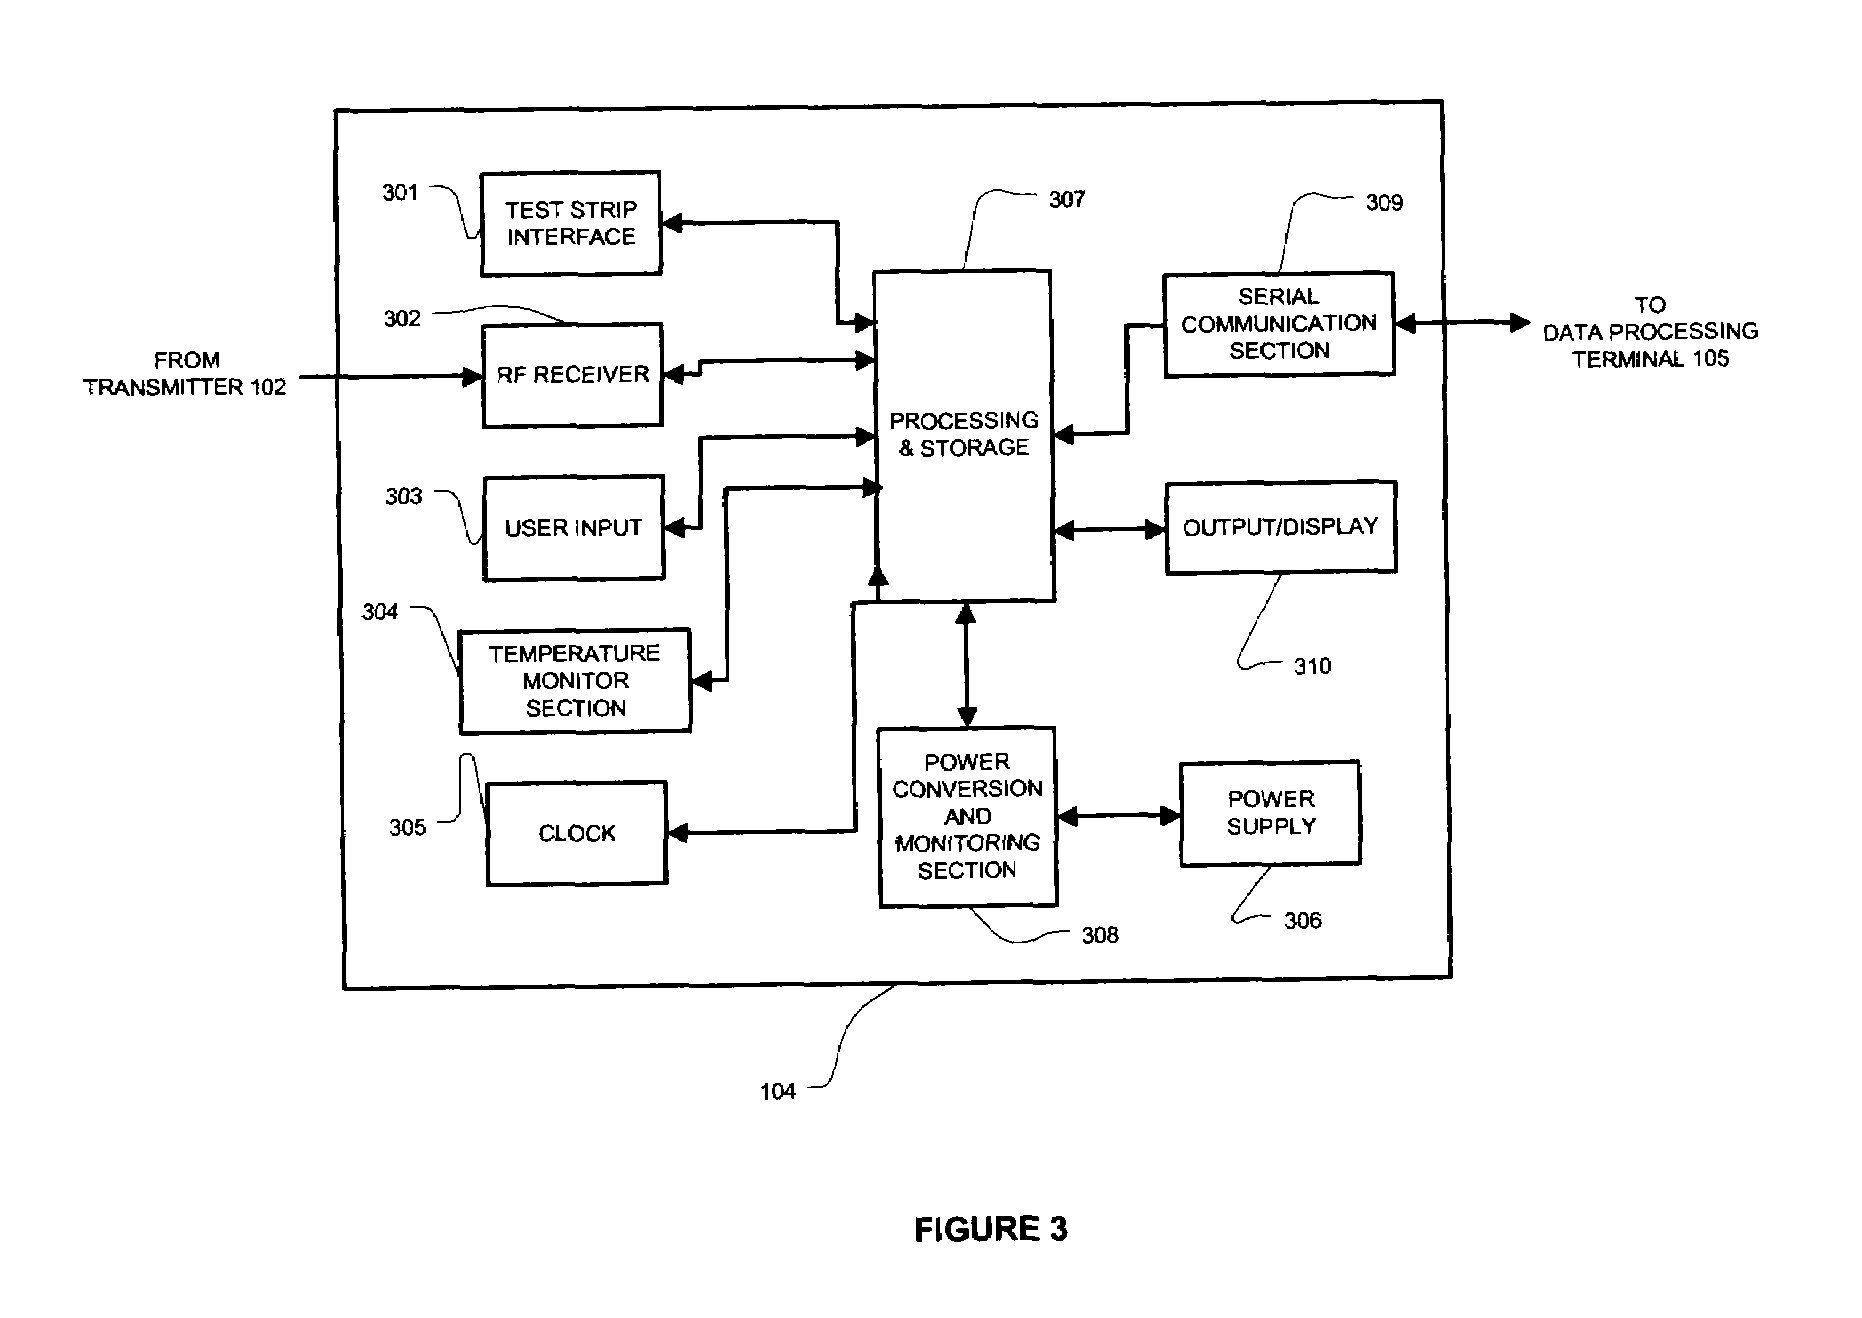 Method and System for Providing Calibration of an Analyte Sensor in an Analyte Monitoring System